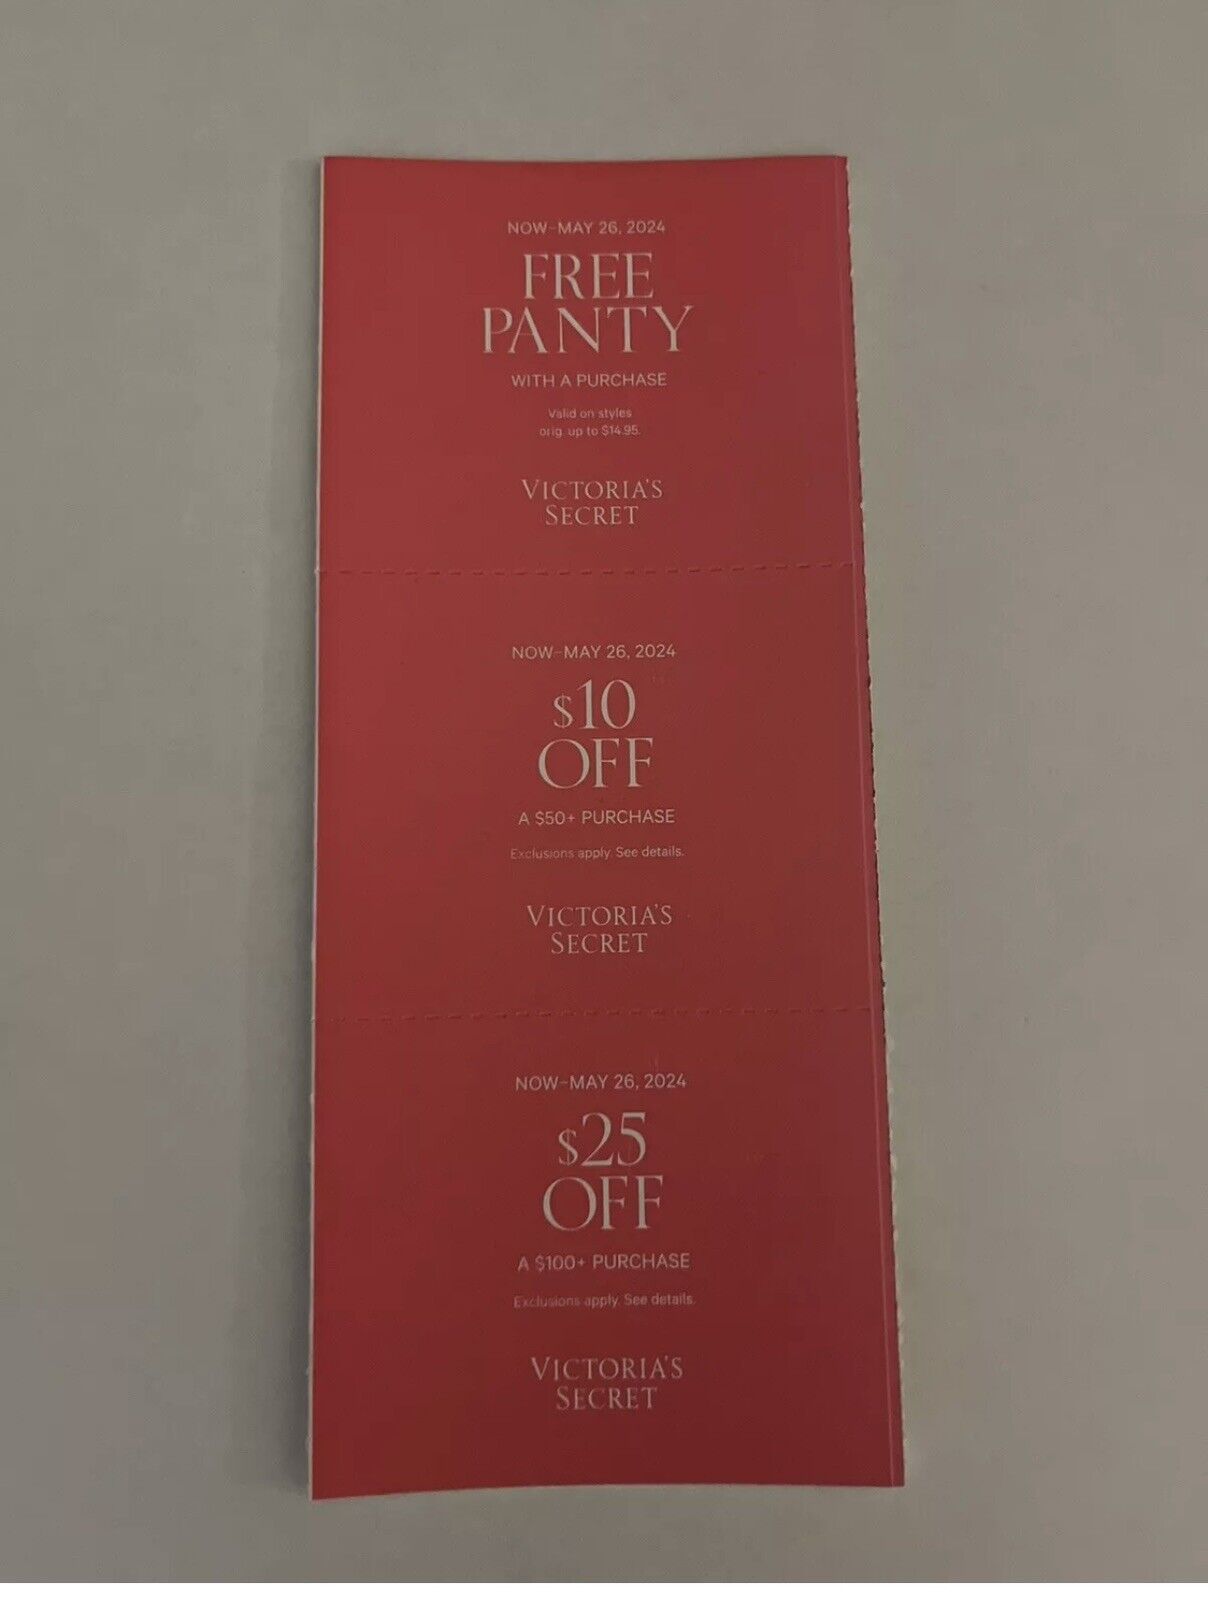 VICTORIAS SECRET Coupons Panty W/purchase $10 off $50 - $25 off $100 Exp 5/26/24